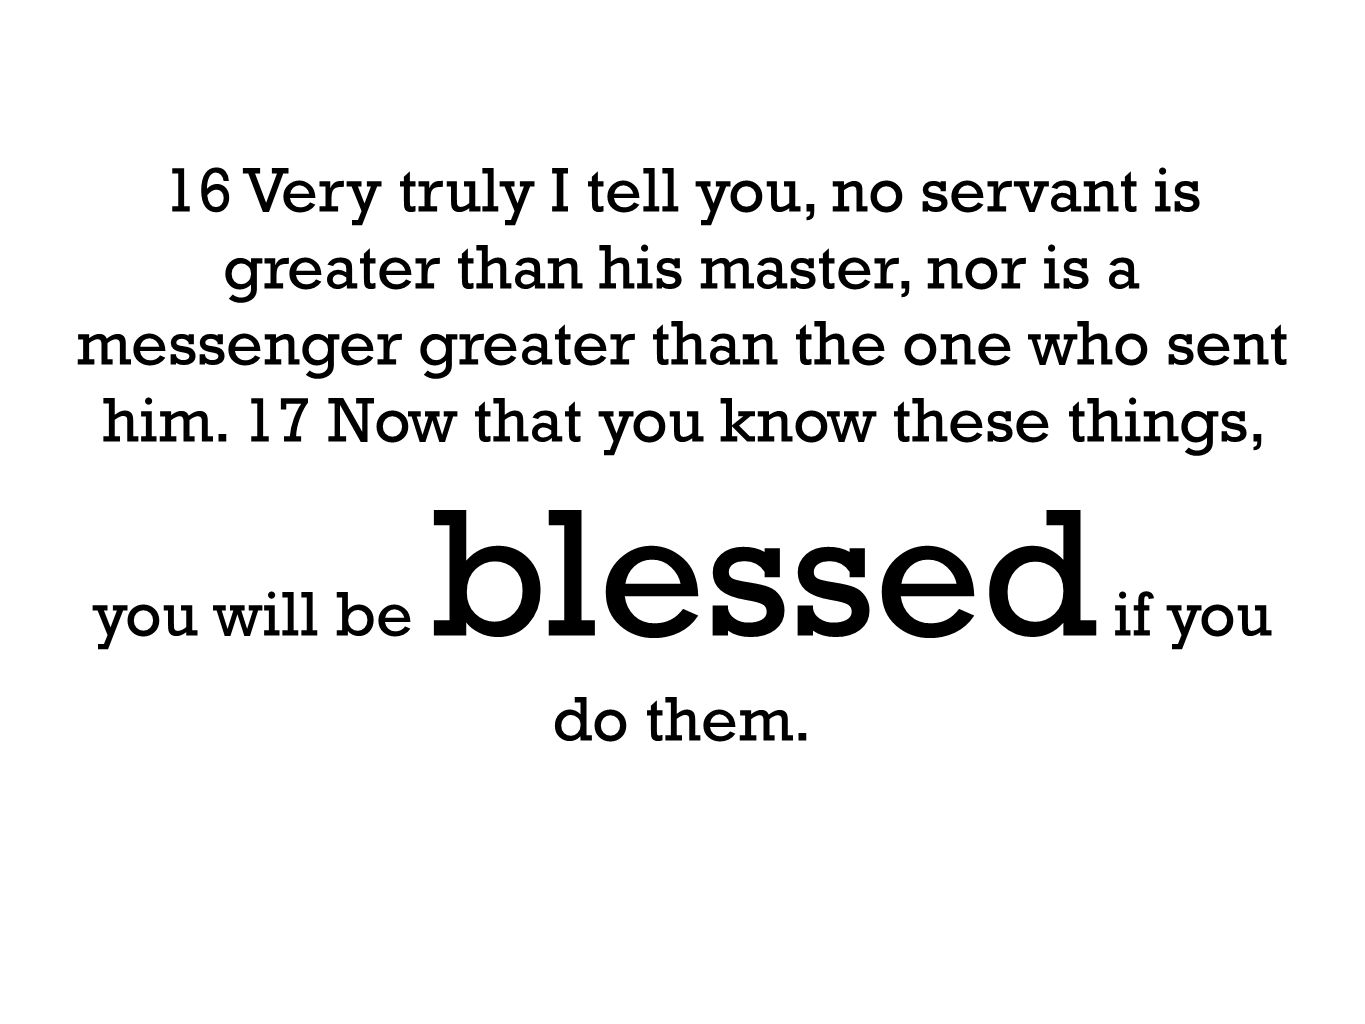 16 Very truly I tell you, no servant is greater than his master, nor is a messenger greater than the one who sent him.